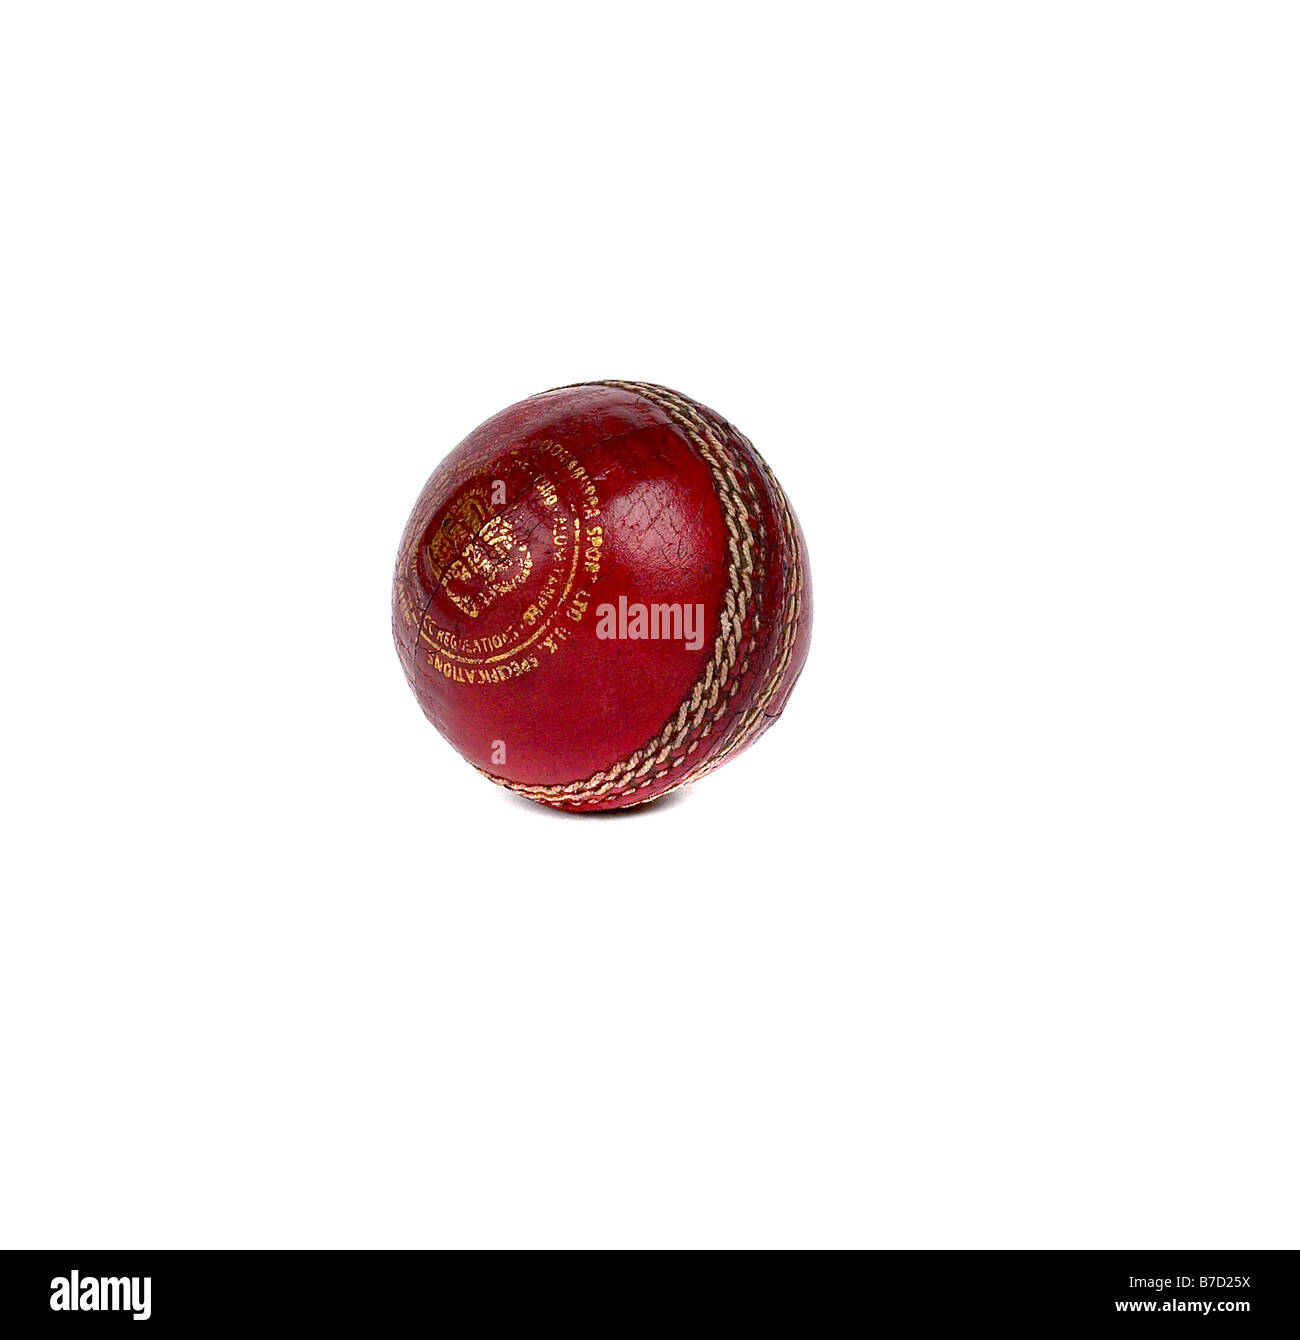 CRICKET BALL RED SEAM OLD WORN DISTRESSED SPIN Stock Photo